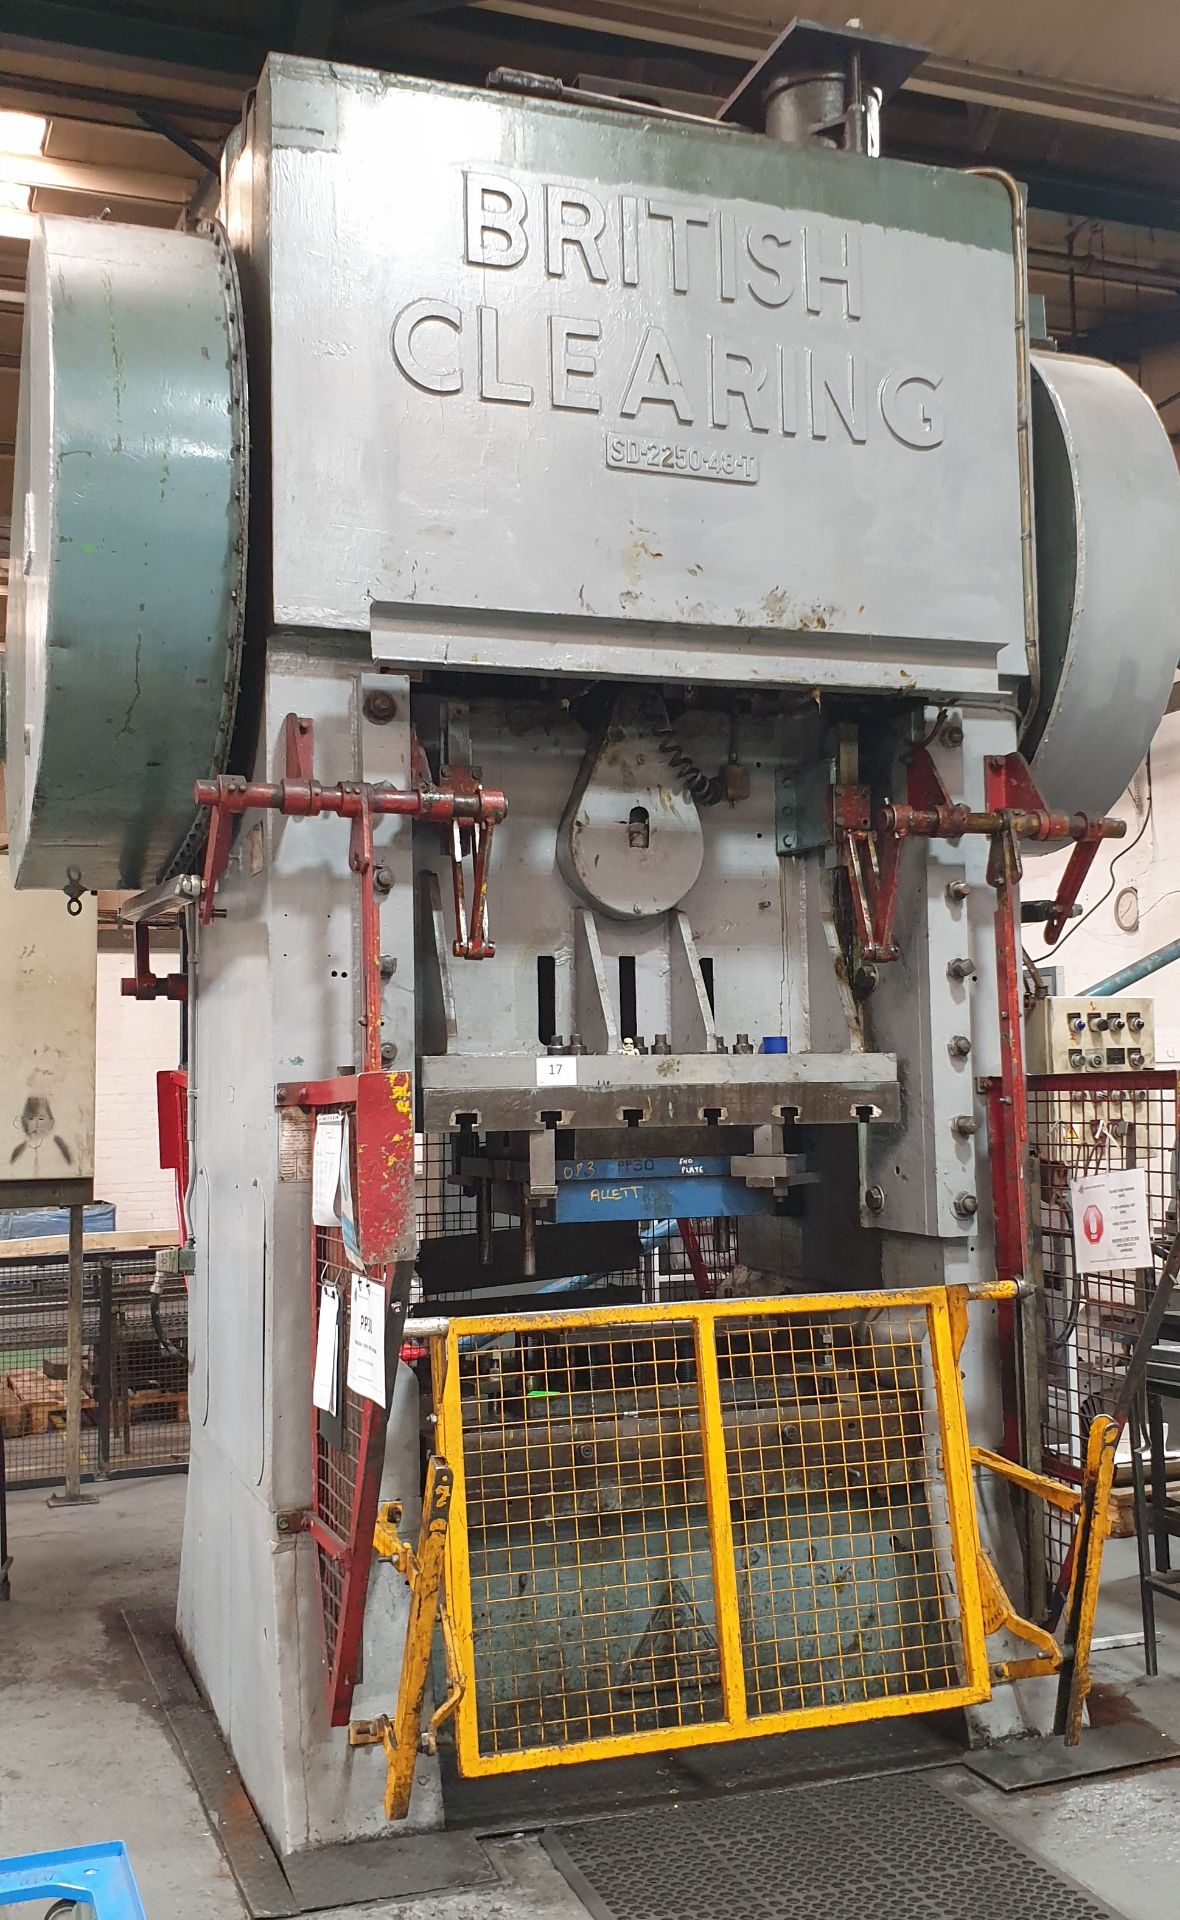 British Clearing SD-2250-48-T, Double Sided Mechanical Power Press, Approx. 200-Tonne Rated , Seria - Image 2 of 4